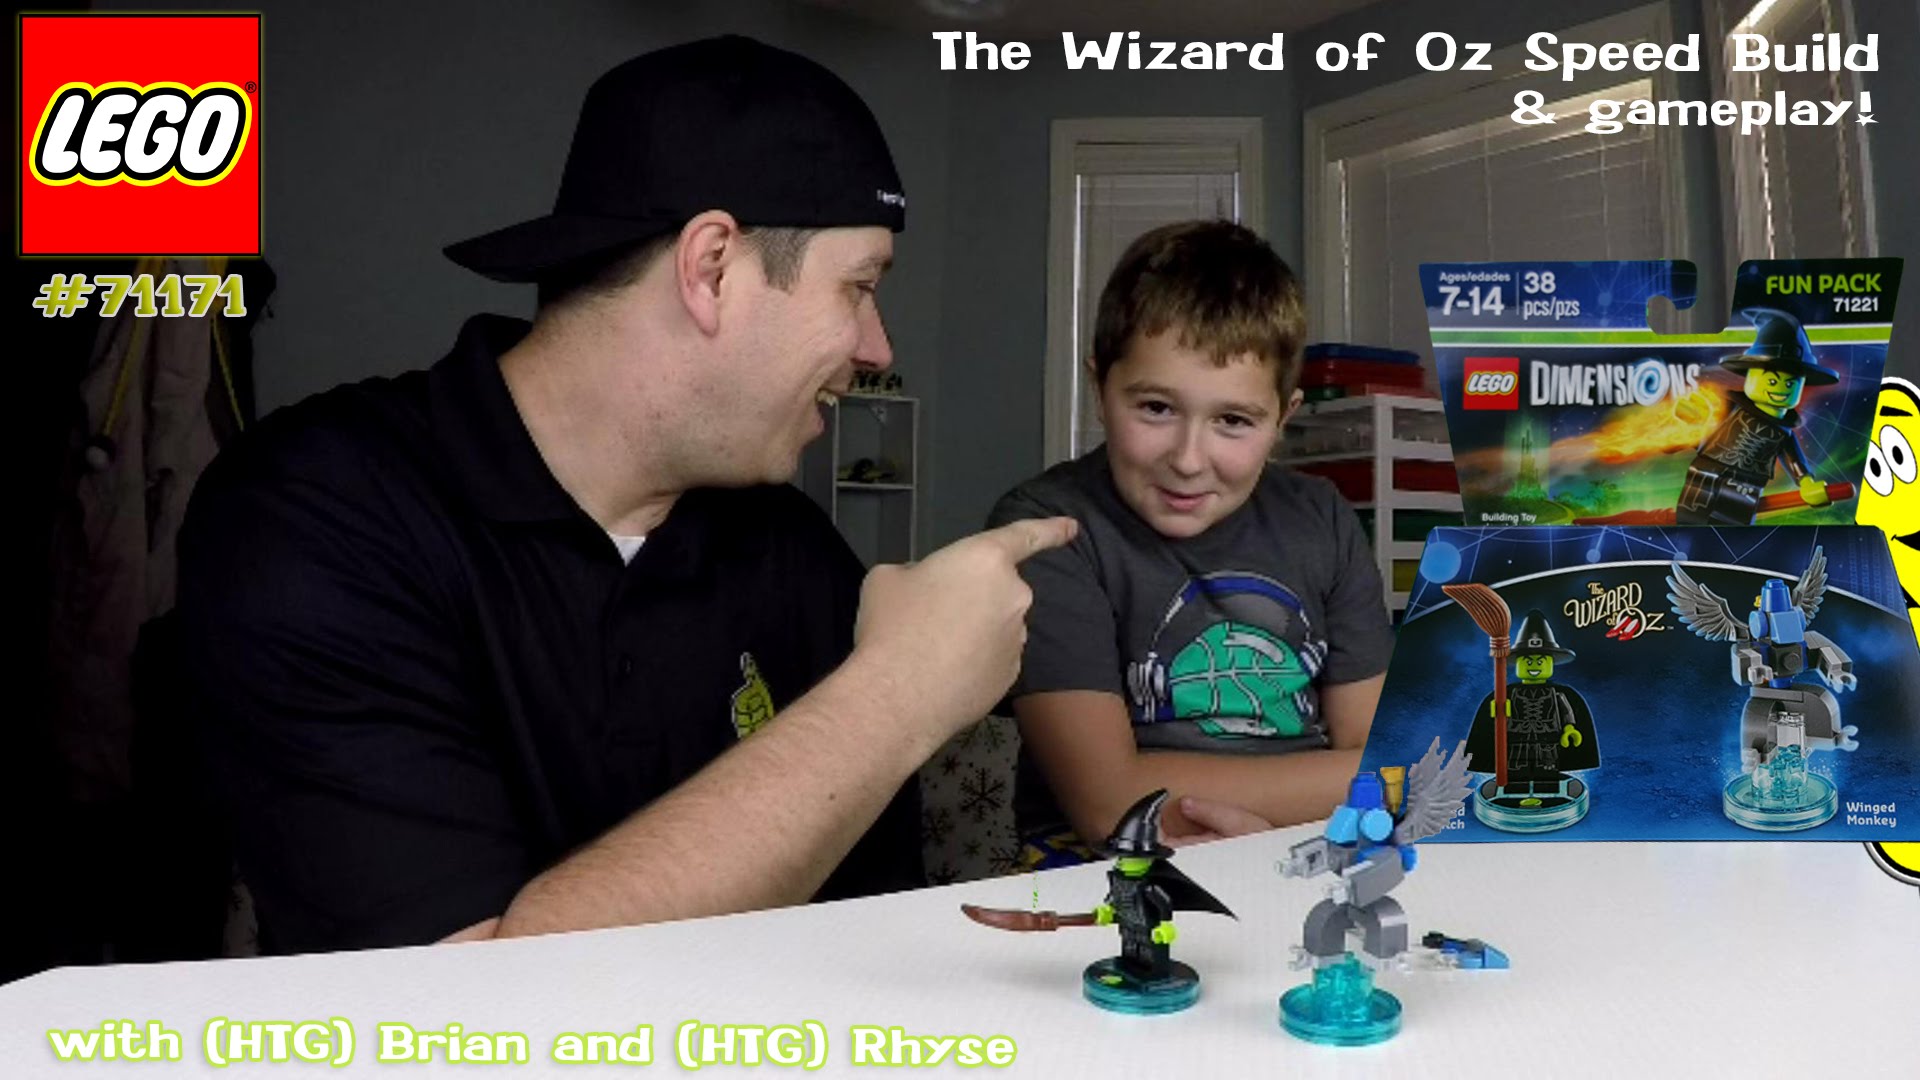 Lego Dimensions: Wizard of Oz Fun Pack #71221 Speed Build & Gameplay – HTG